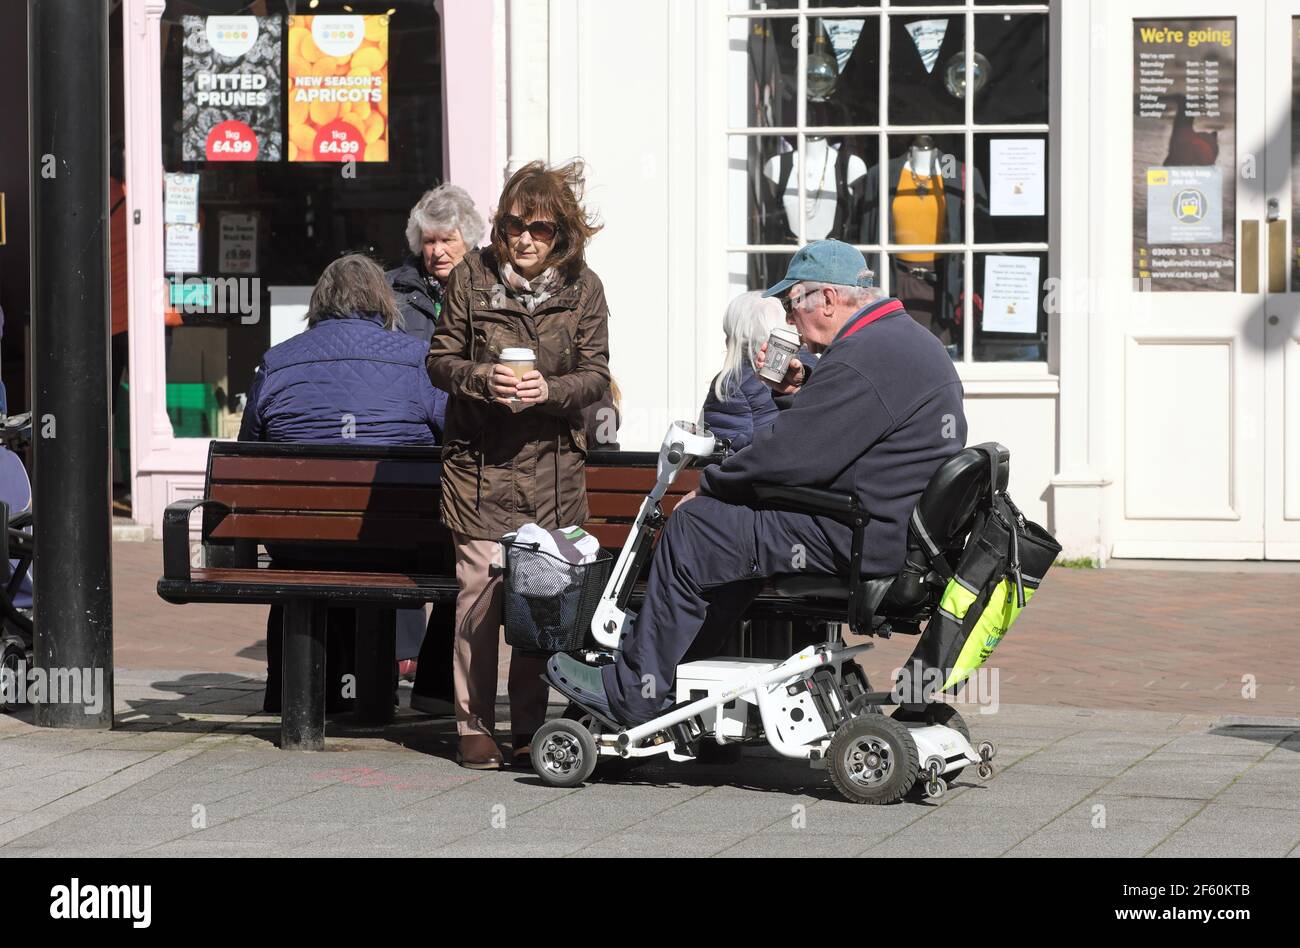 Hereford, Herefordshire UK - Monday 29th March 2021 - People meet up in Hereford city centre to enjoy an outdoor cup of coffee on a lovely sunny Spring day as Coronavirus restrictions are eased to allow up to six people from two households to meet outdoors. Photo Steven May / Alamy Live News Stock Photo